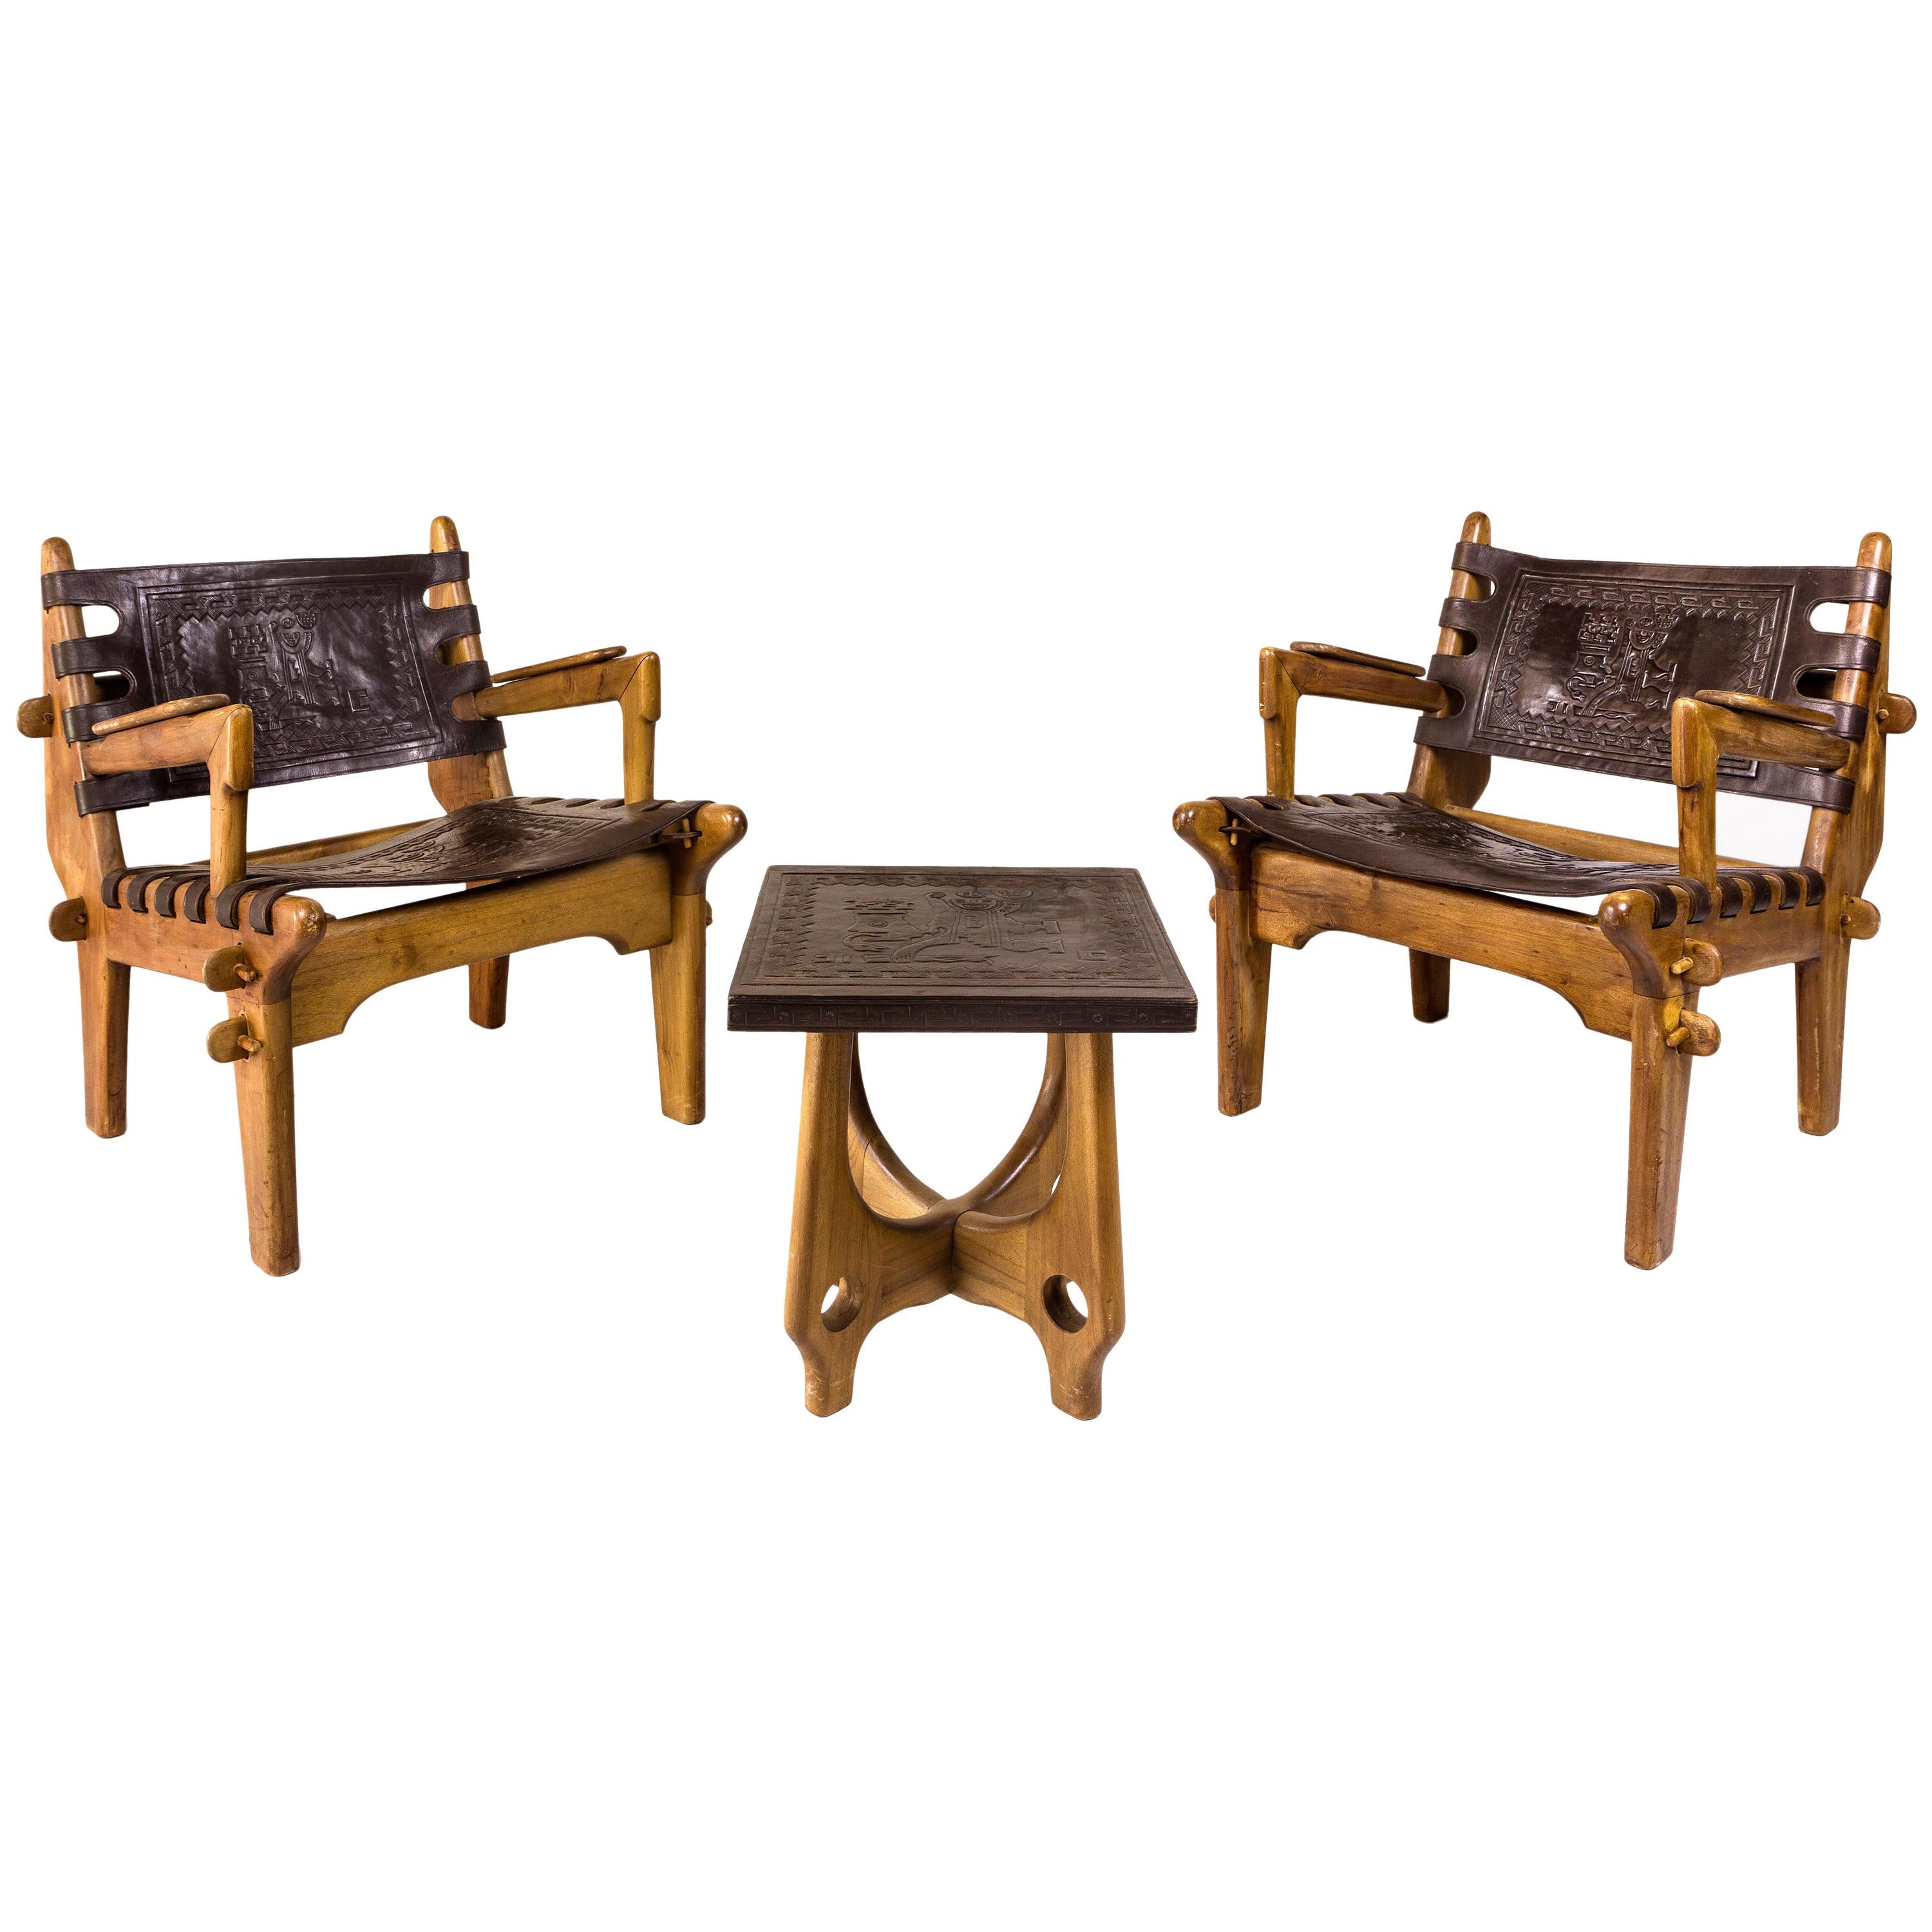 Angel Pazmino, Pair of Armchairs with Side Table, Wood and Leather, circa 1970